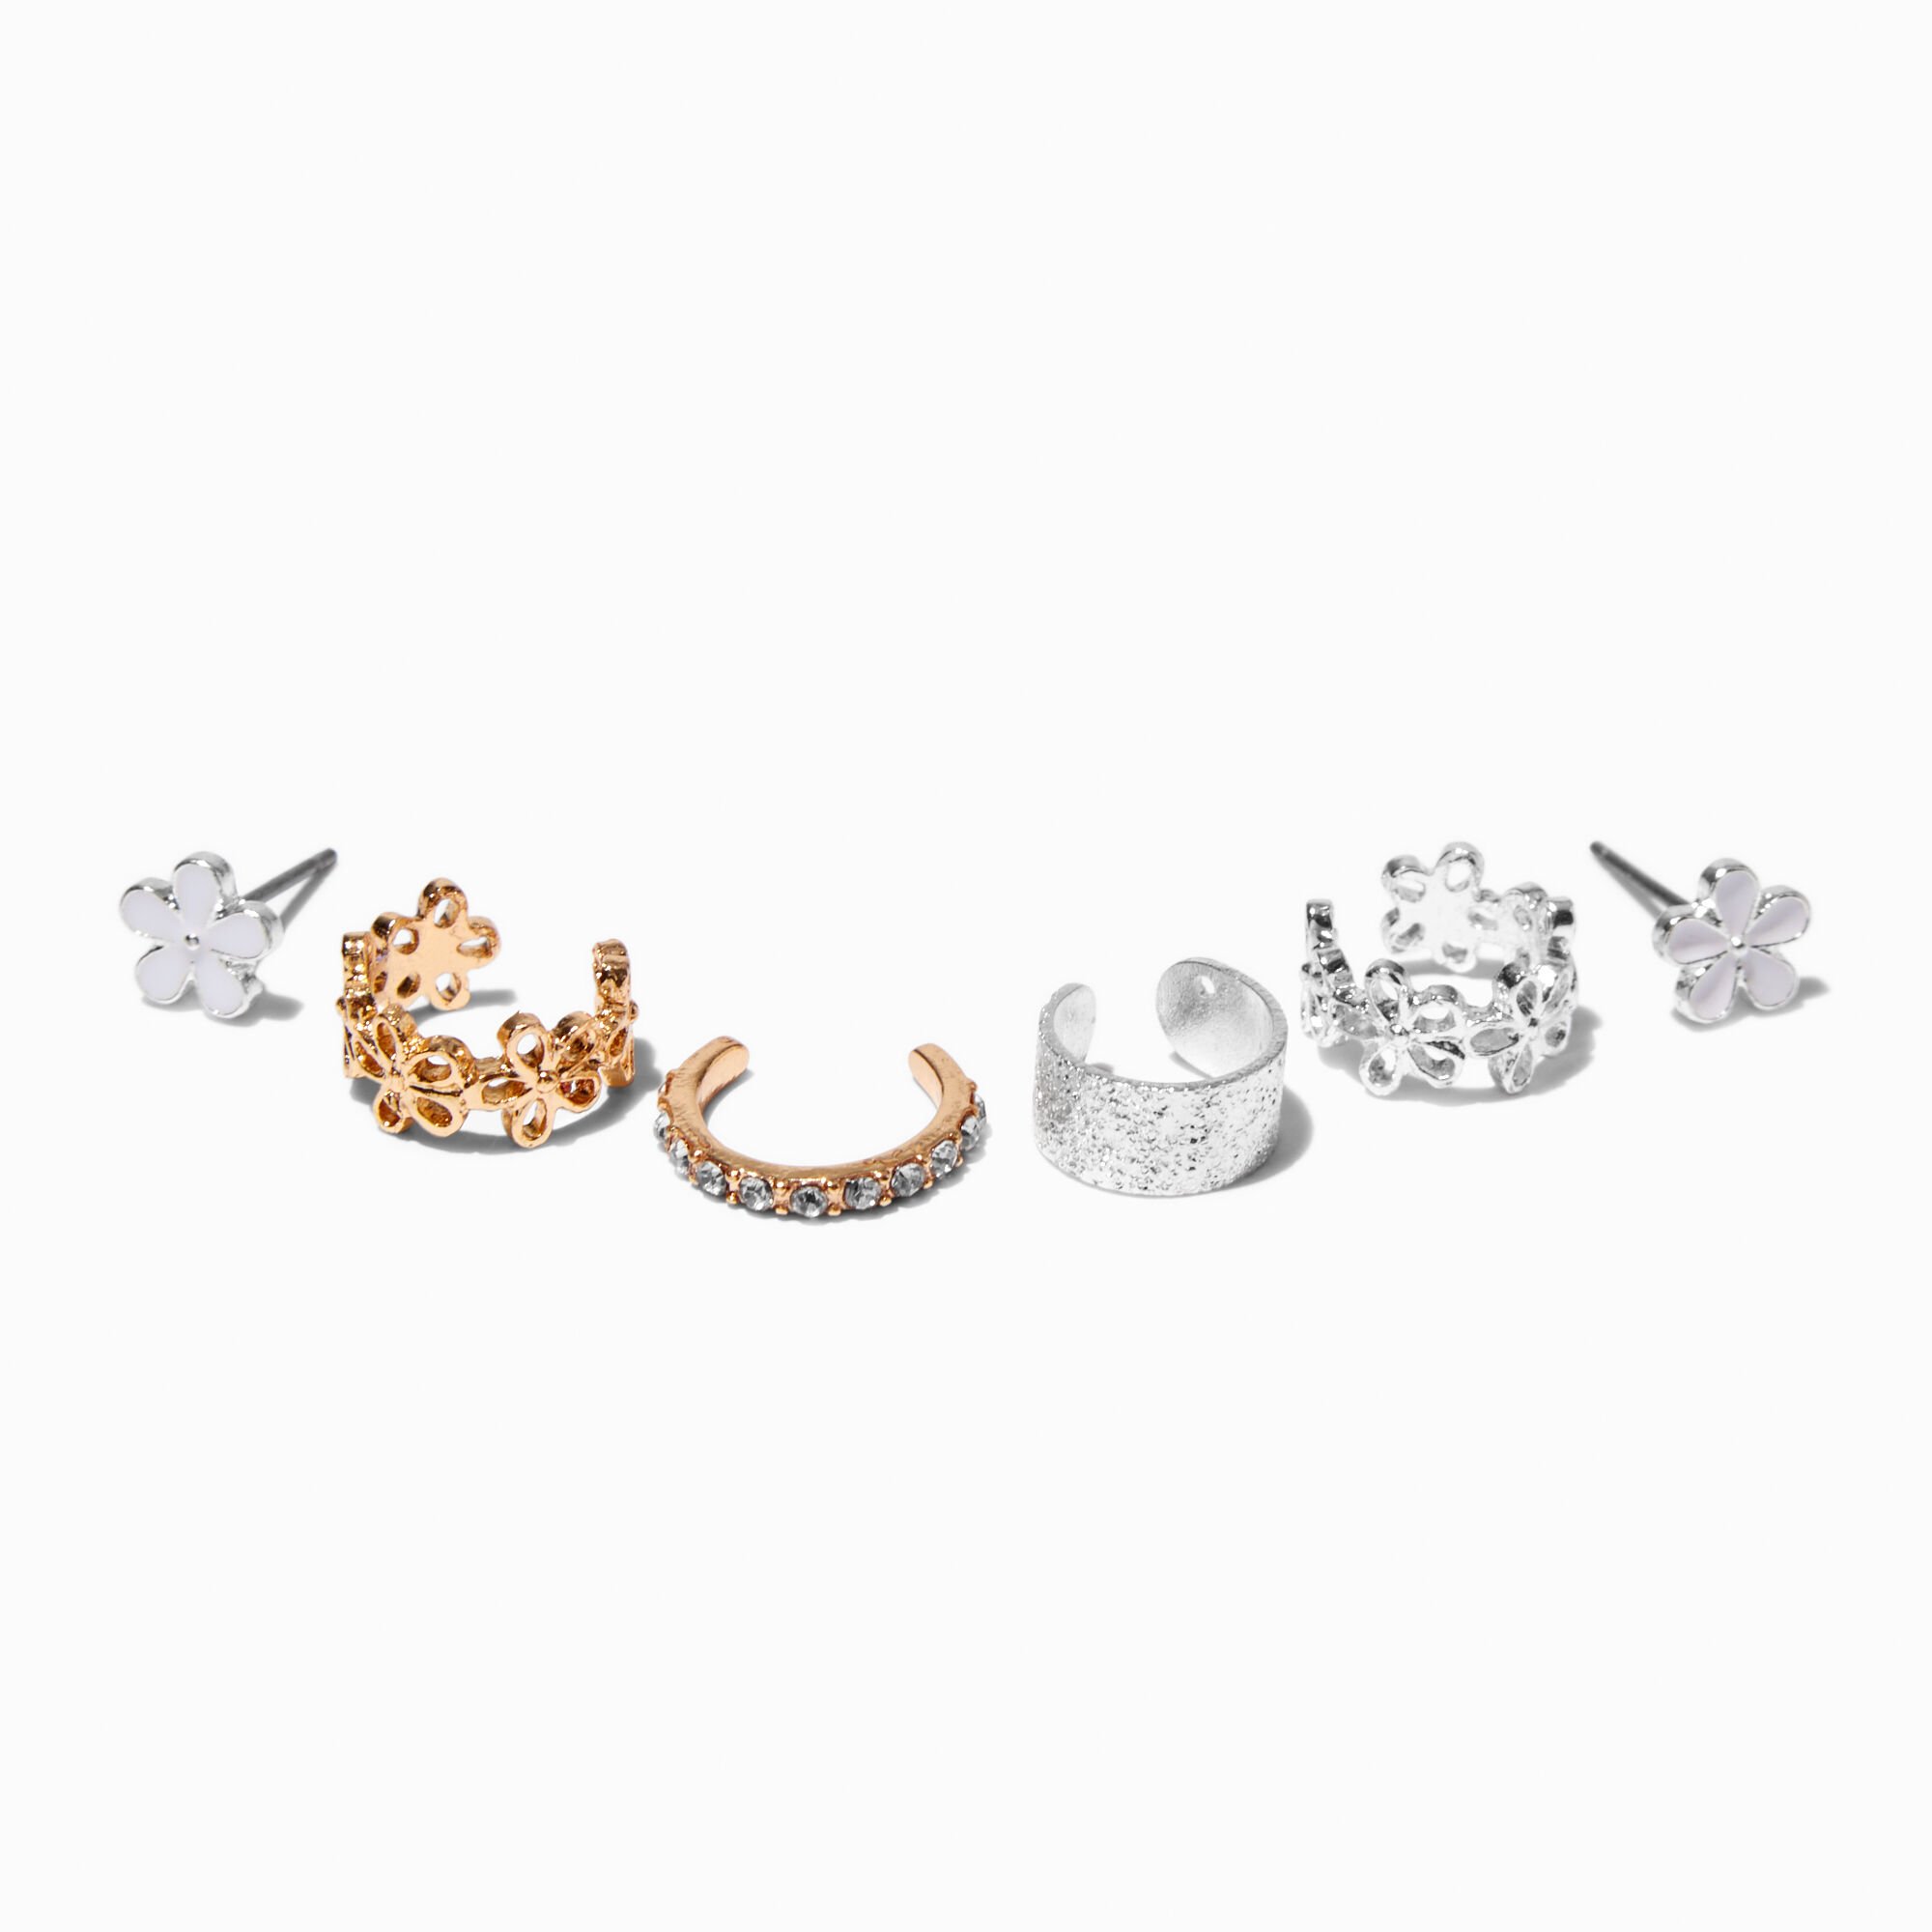 View Claires Tone Daisy Stud Ear Cuff Earrings Stackables 6 Pack Silver information